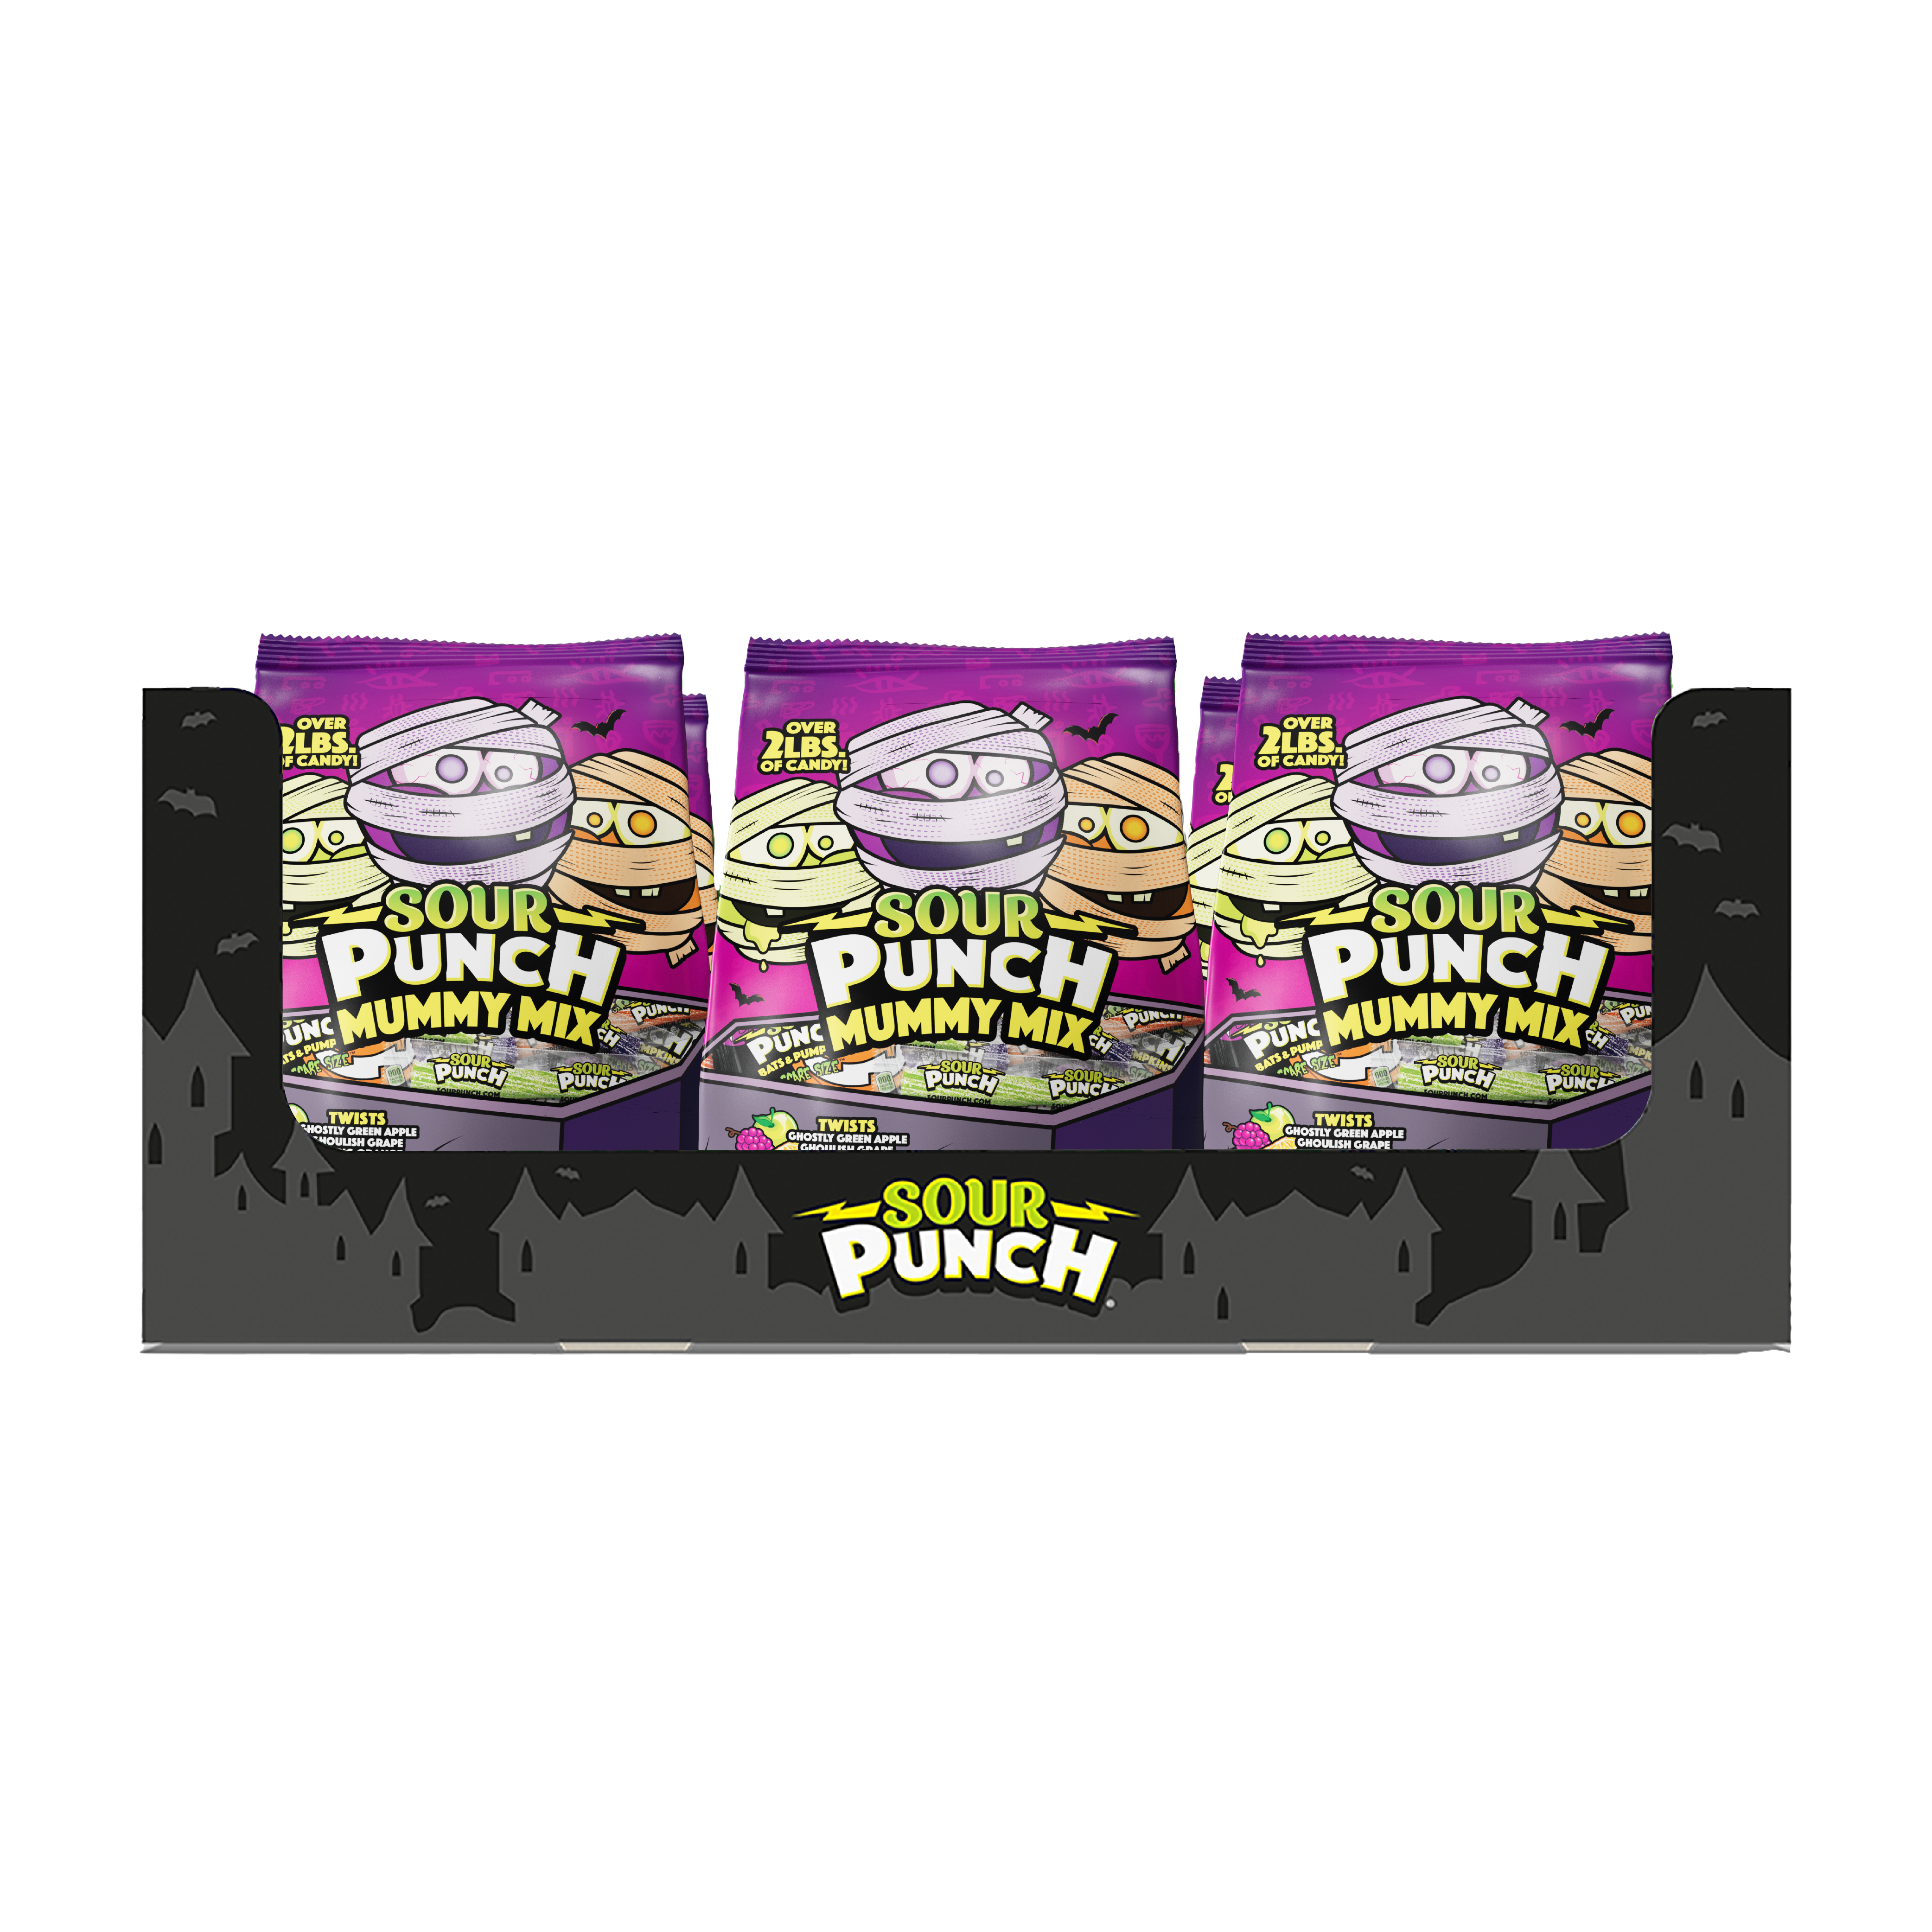 6-Pack of SOUR PUNCH Mummy Mix Halloween Candy 35oz Bags